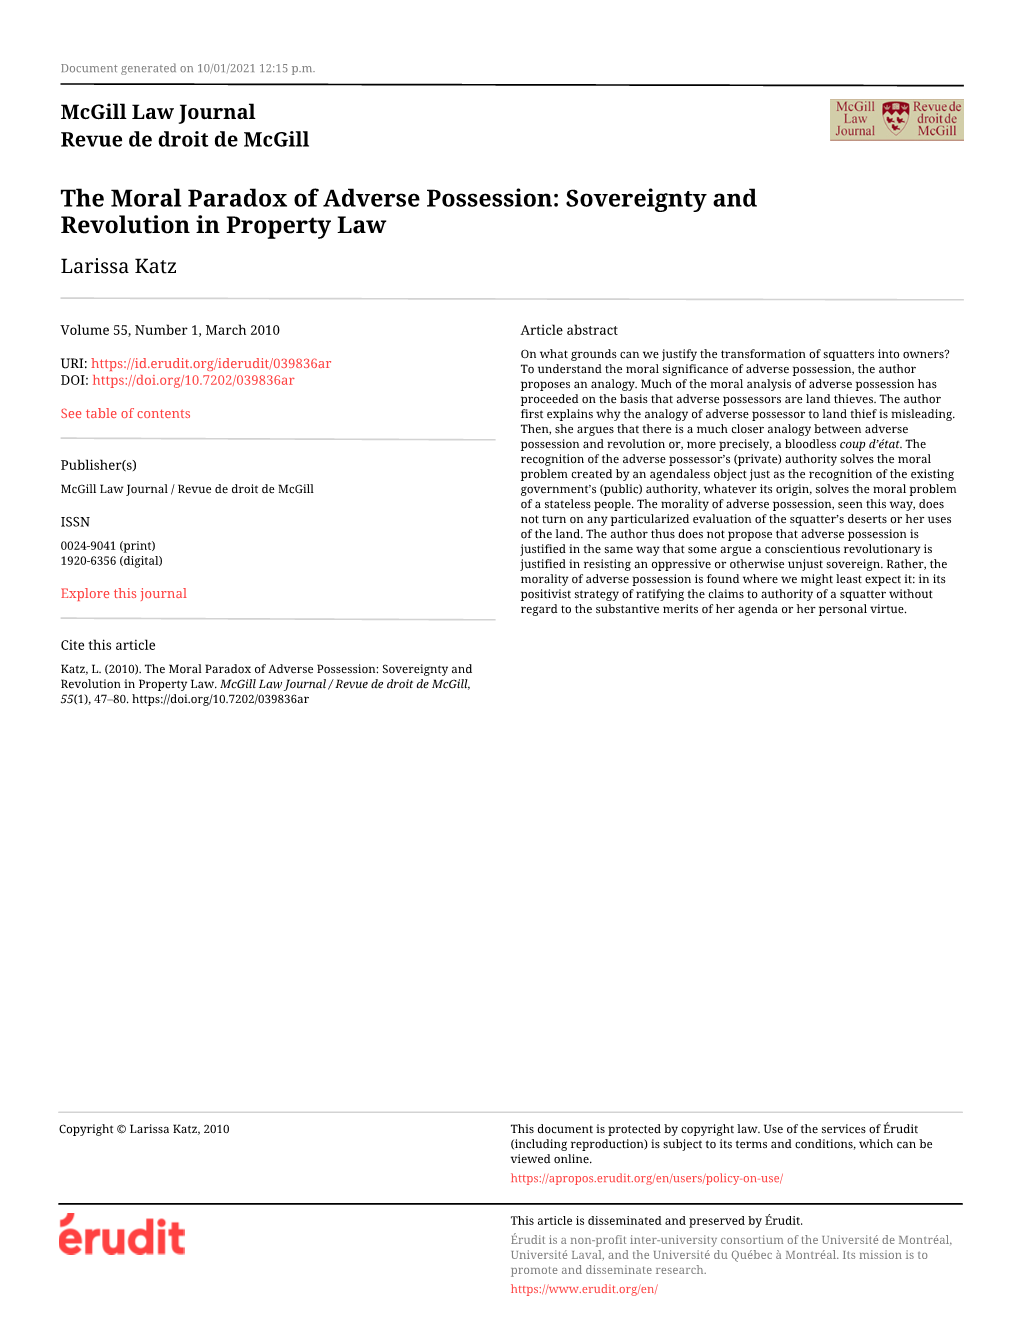 The Moral Paradox of Adverse Possession: Sovereignty and Revolution in Property Law Larissa Katz